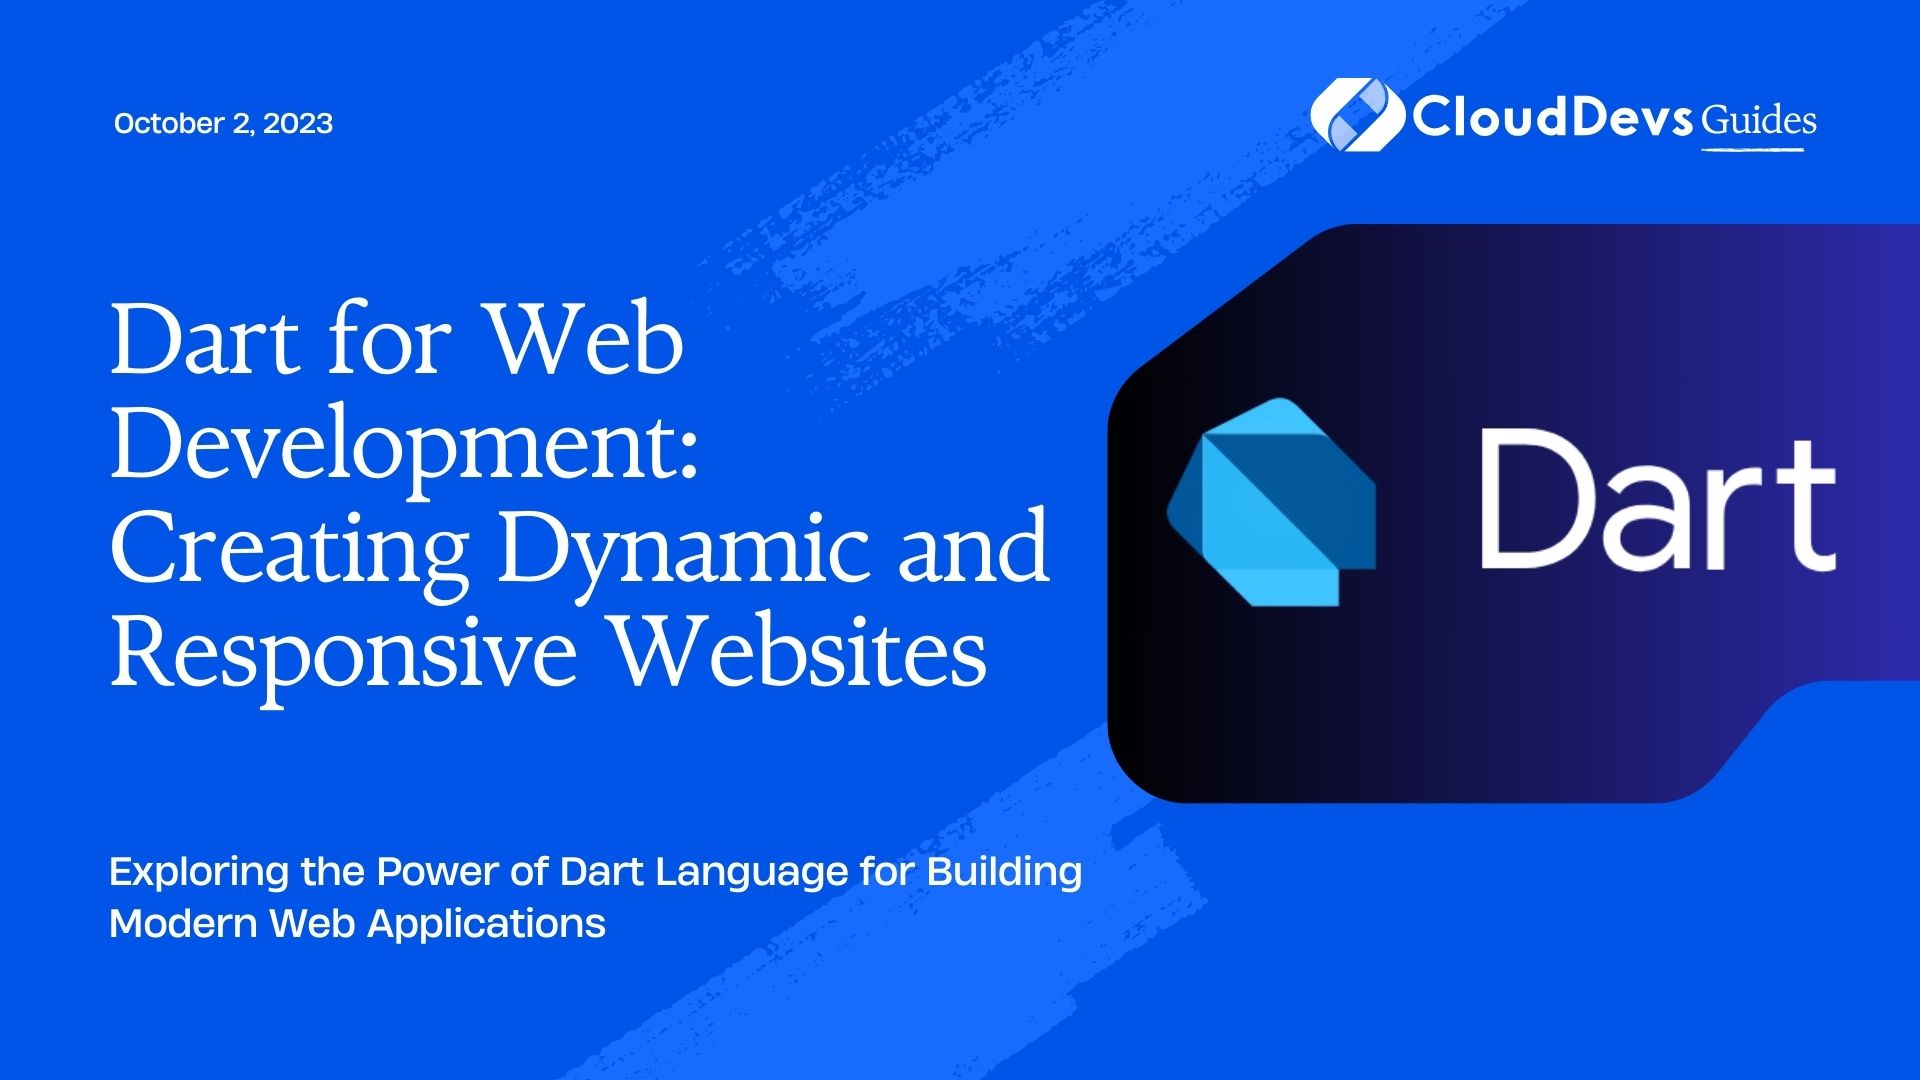 Dart for Web Development: Creating Dynamic and Responsive Websites